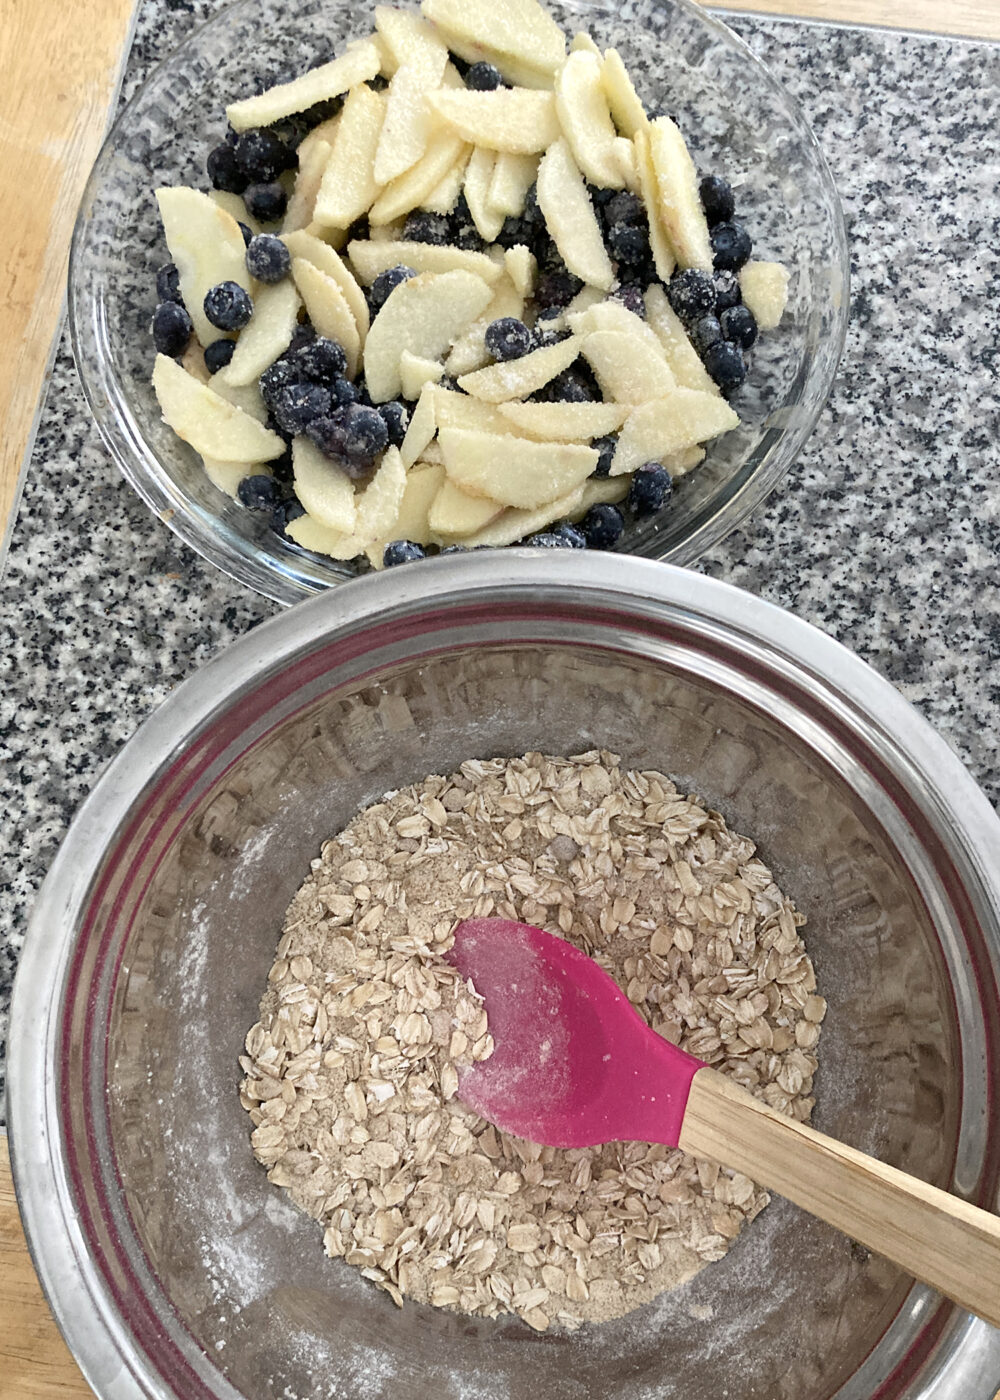 Two bowls sit side by side. In the upper portion of the frame, the glass bowl contains apple slices and blueberries mixed with sugar and flour. In the lower portion of the frame is a metal bowl with a oats mixture.